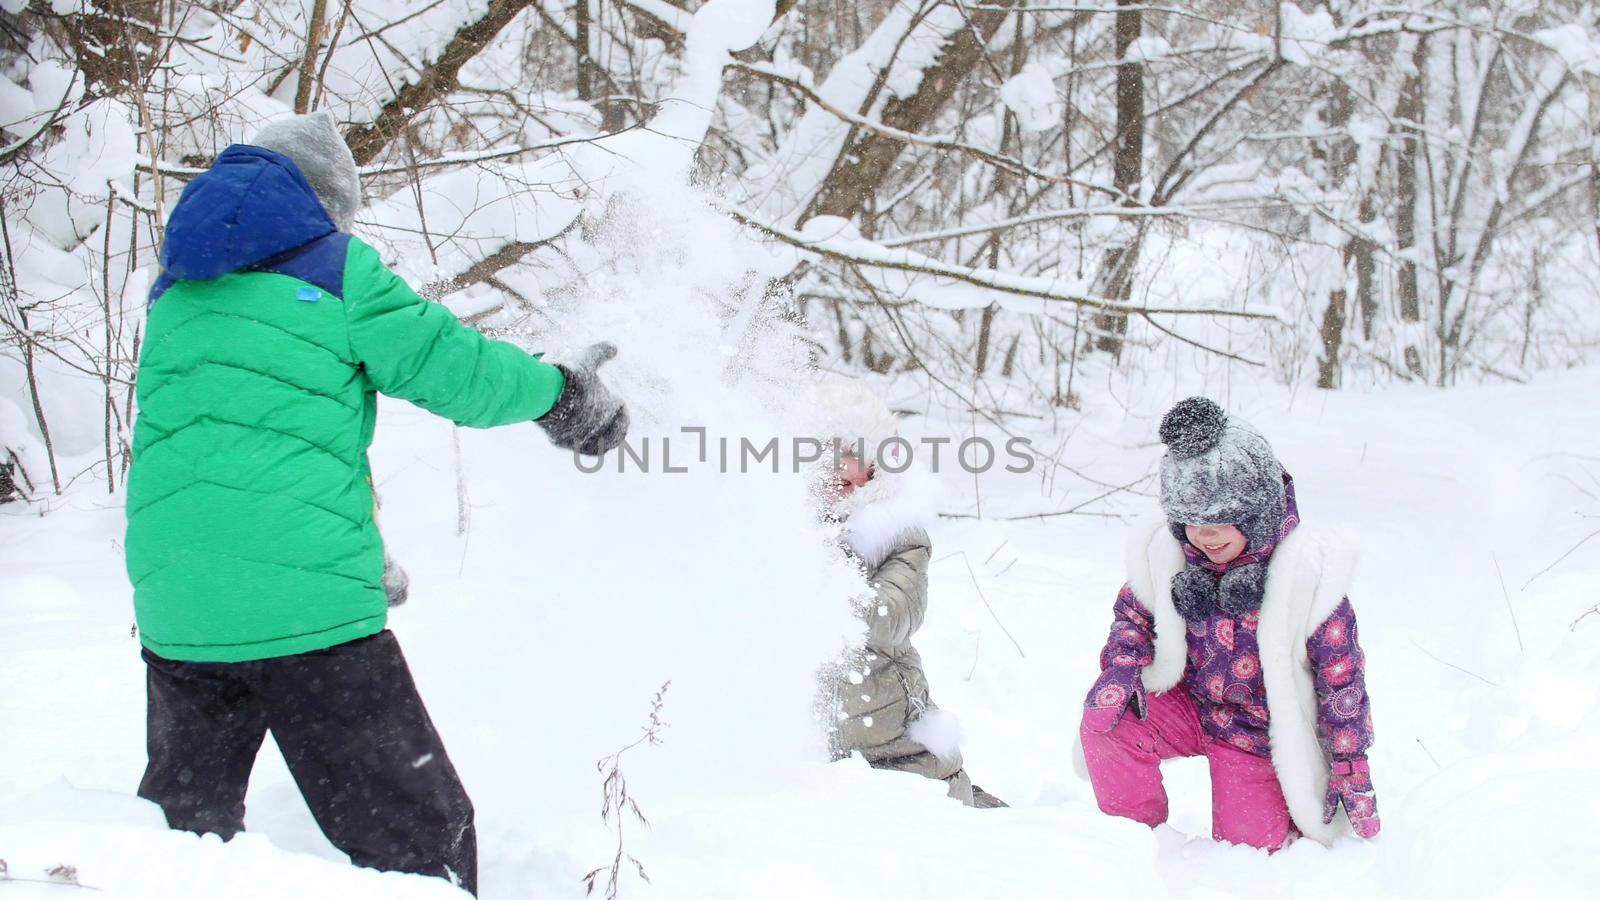 Two little girls playing with a little boy in the snow in winter forest. Mid shot